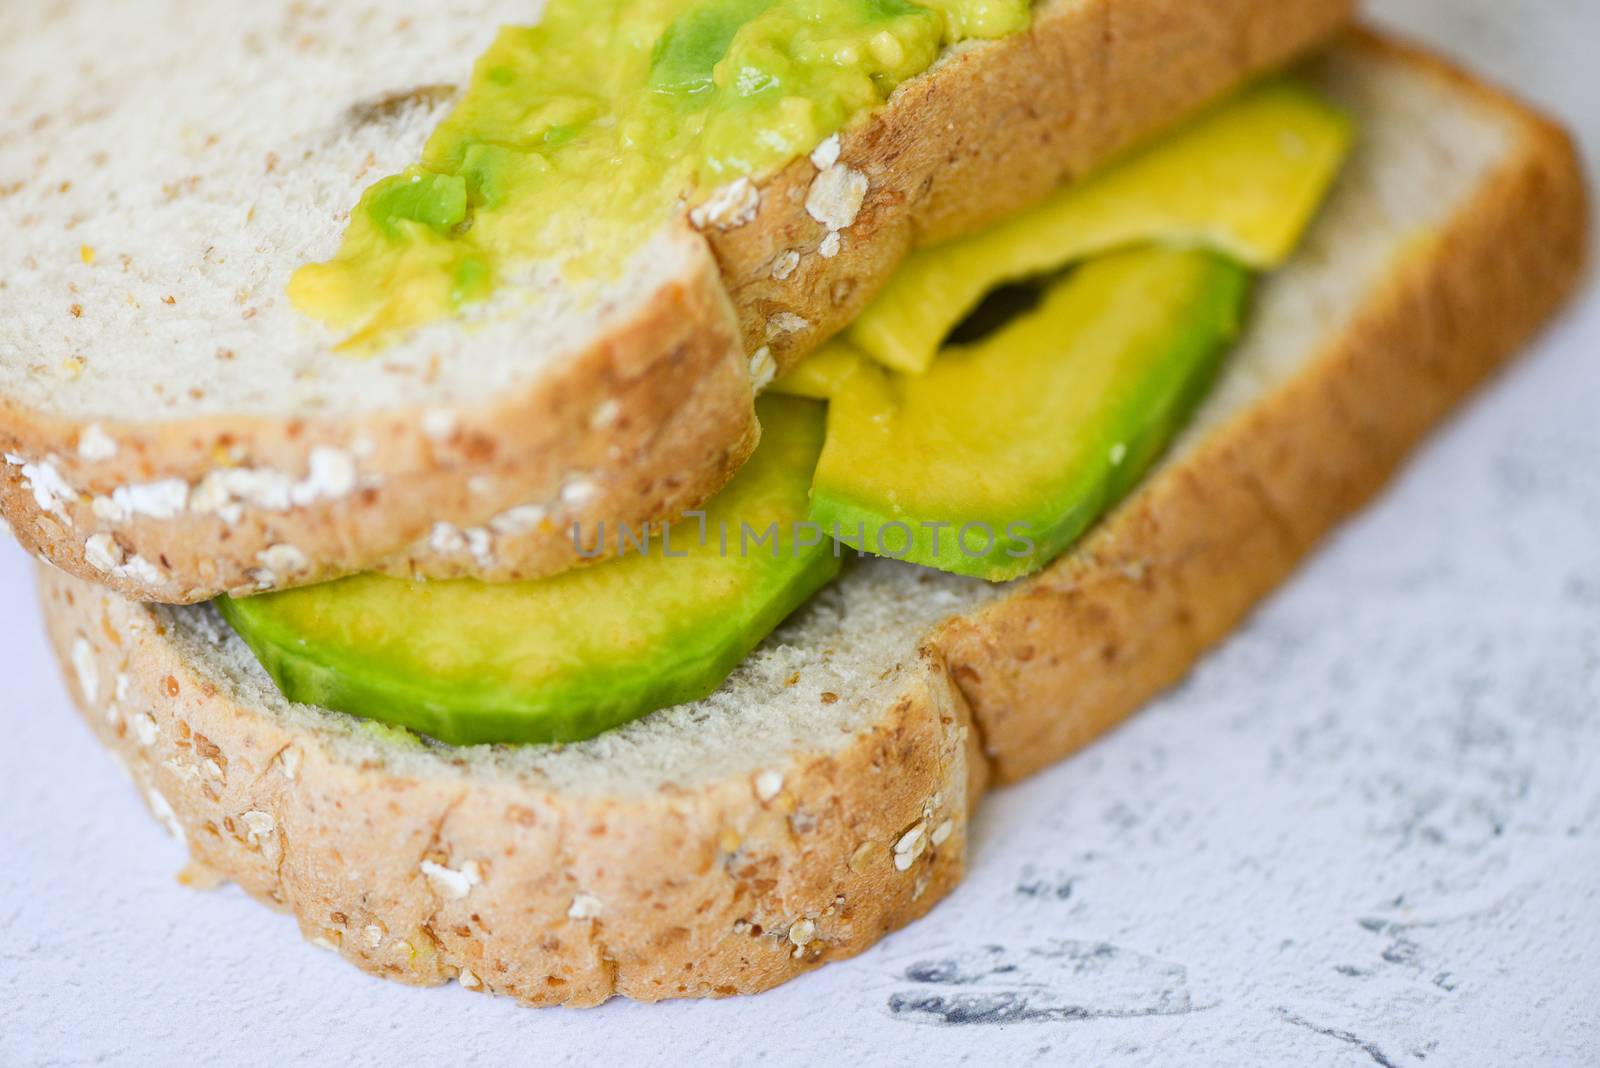 Avocado sandwich and avocado toast on plate background fruits healthy food concept / avocado dip mashed